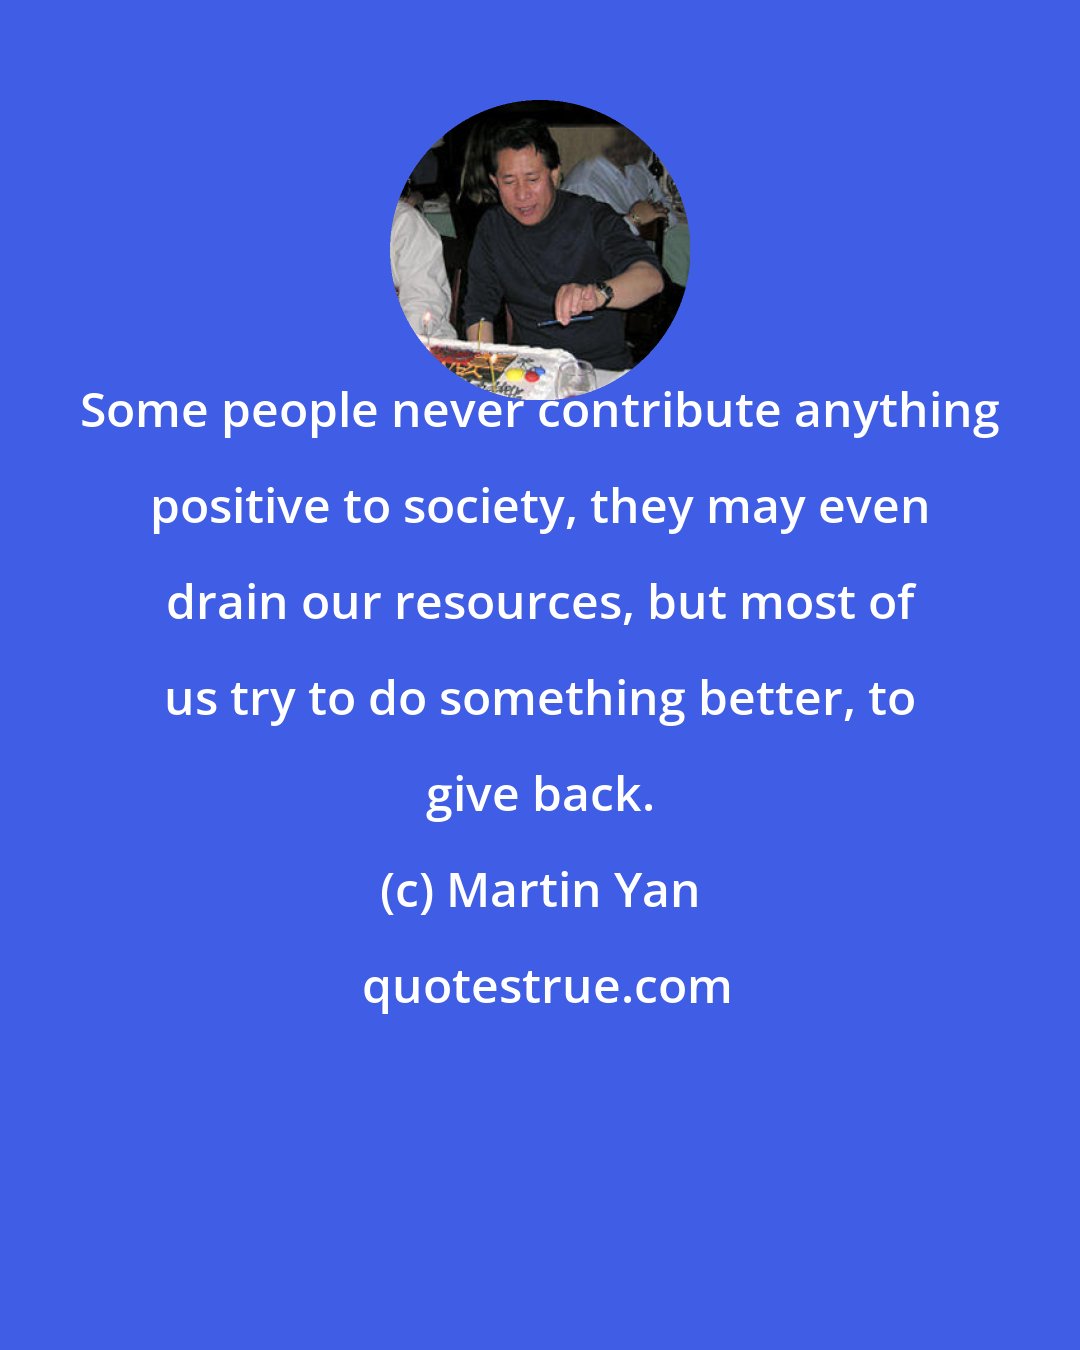 Martin Yan: Some people never contribute anything positive to society, they may even drain our resources, but most of us try to do something better, to give back.